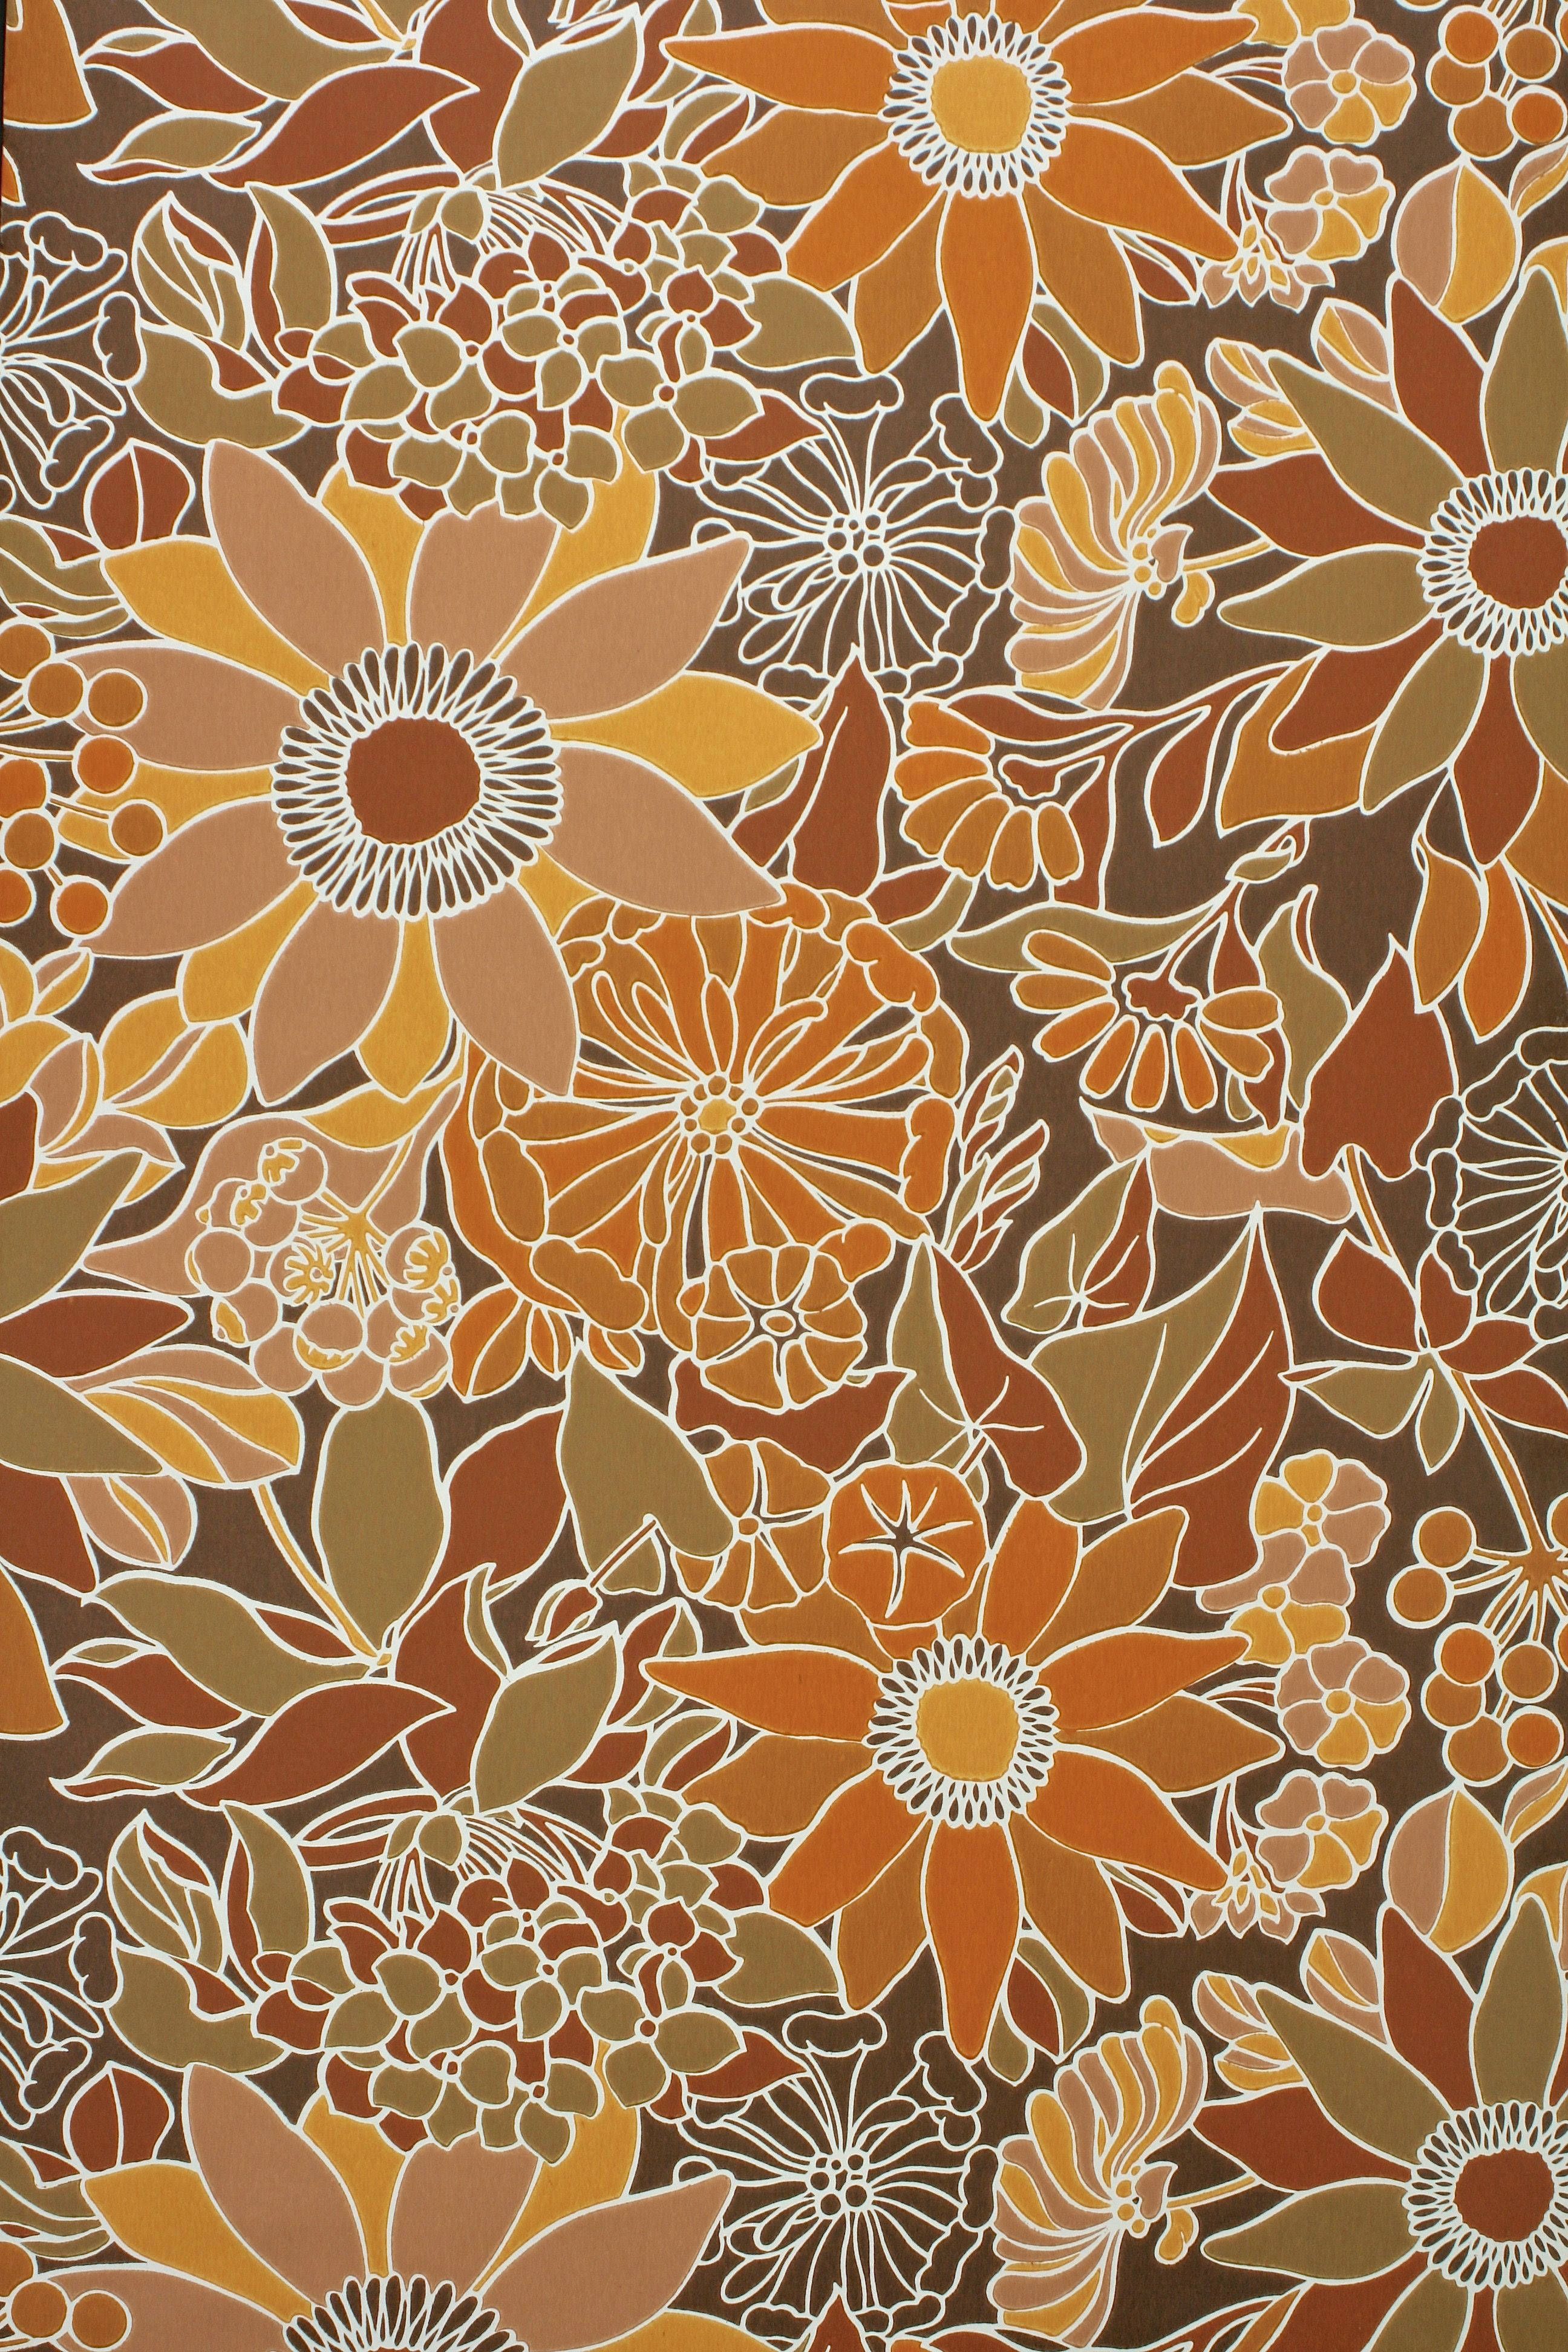 A brown and orange flower pattern on fabric - 70s, vintage